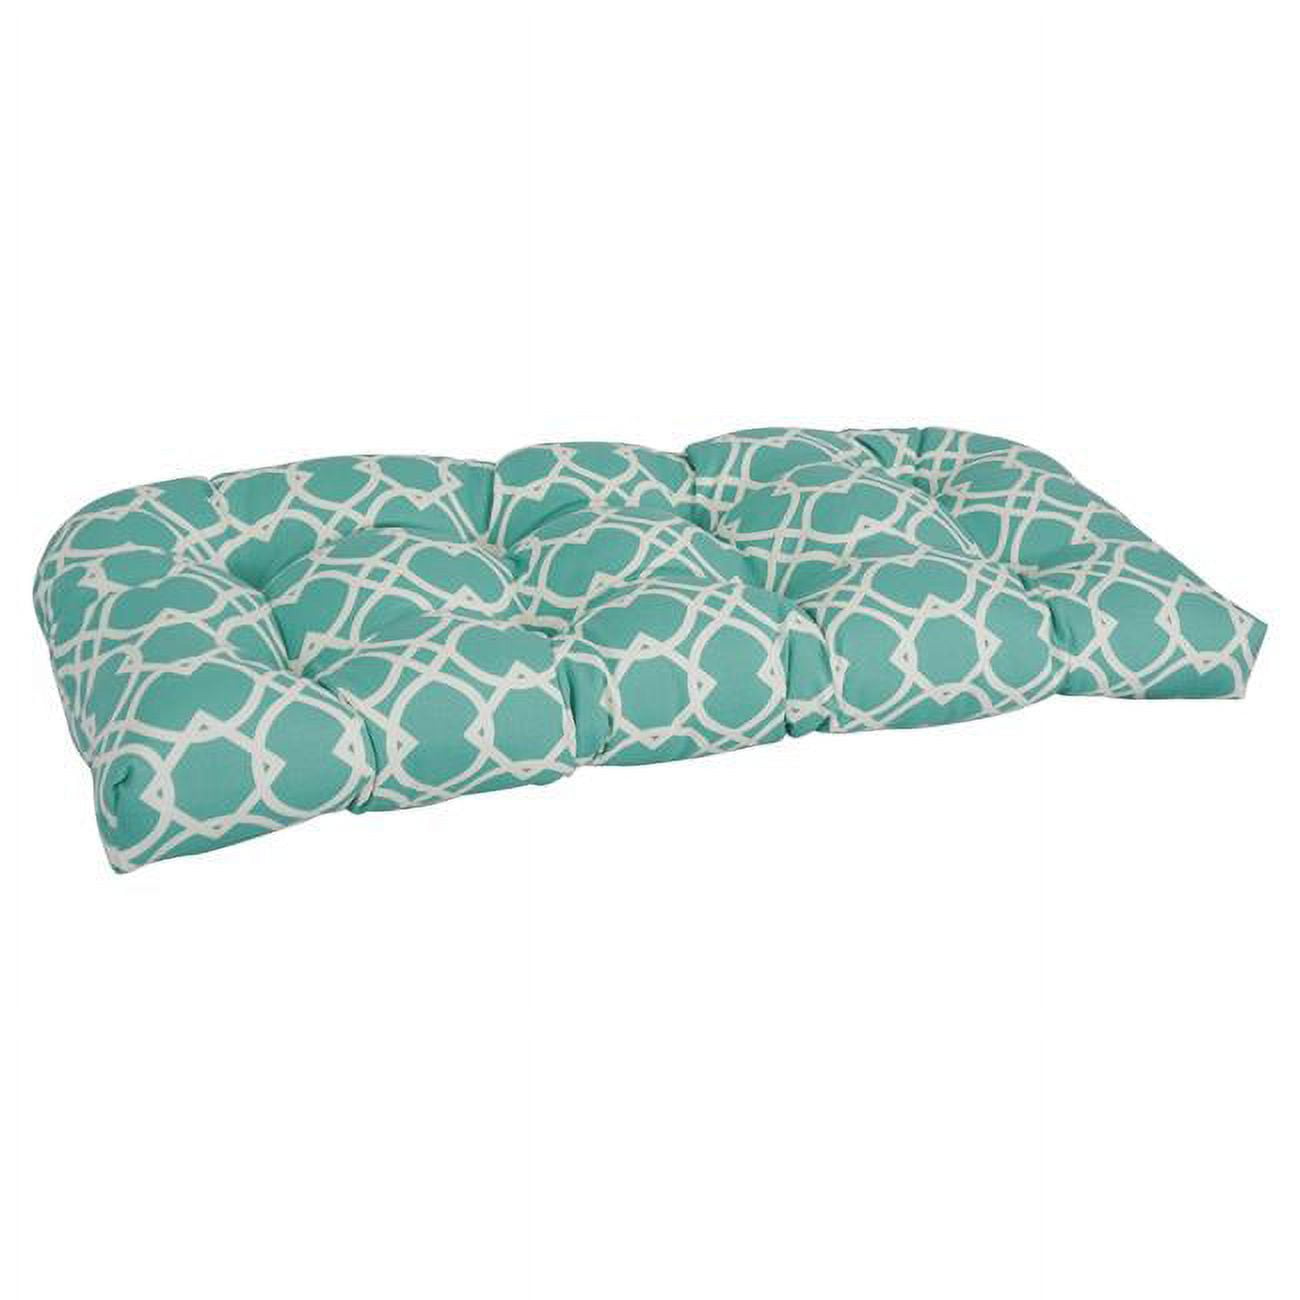 Picture of Blazing Needles 93180-LS-OD-144 42 x 19 in. U-Shaped Patterned Spun Polyester Tufted Settee & Bench Cushion&#44; Elipse Pool